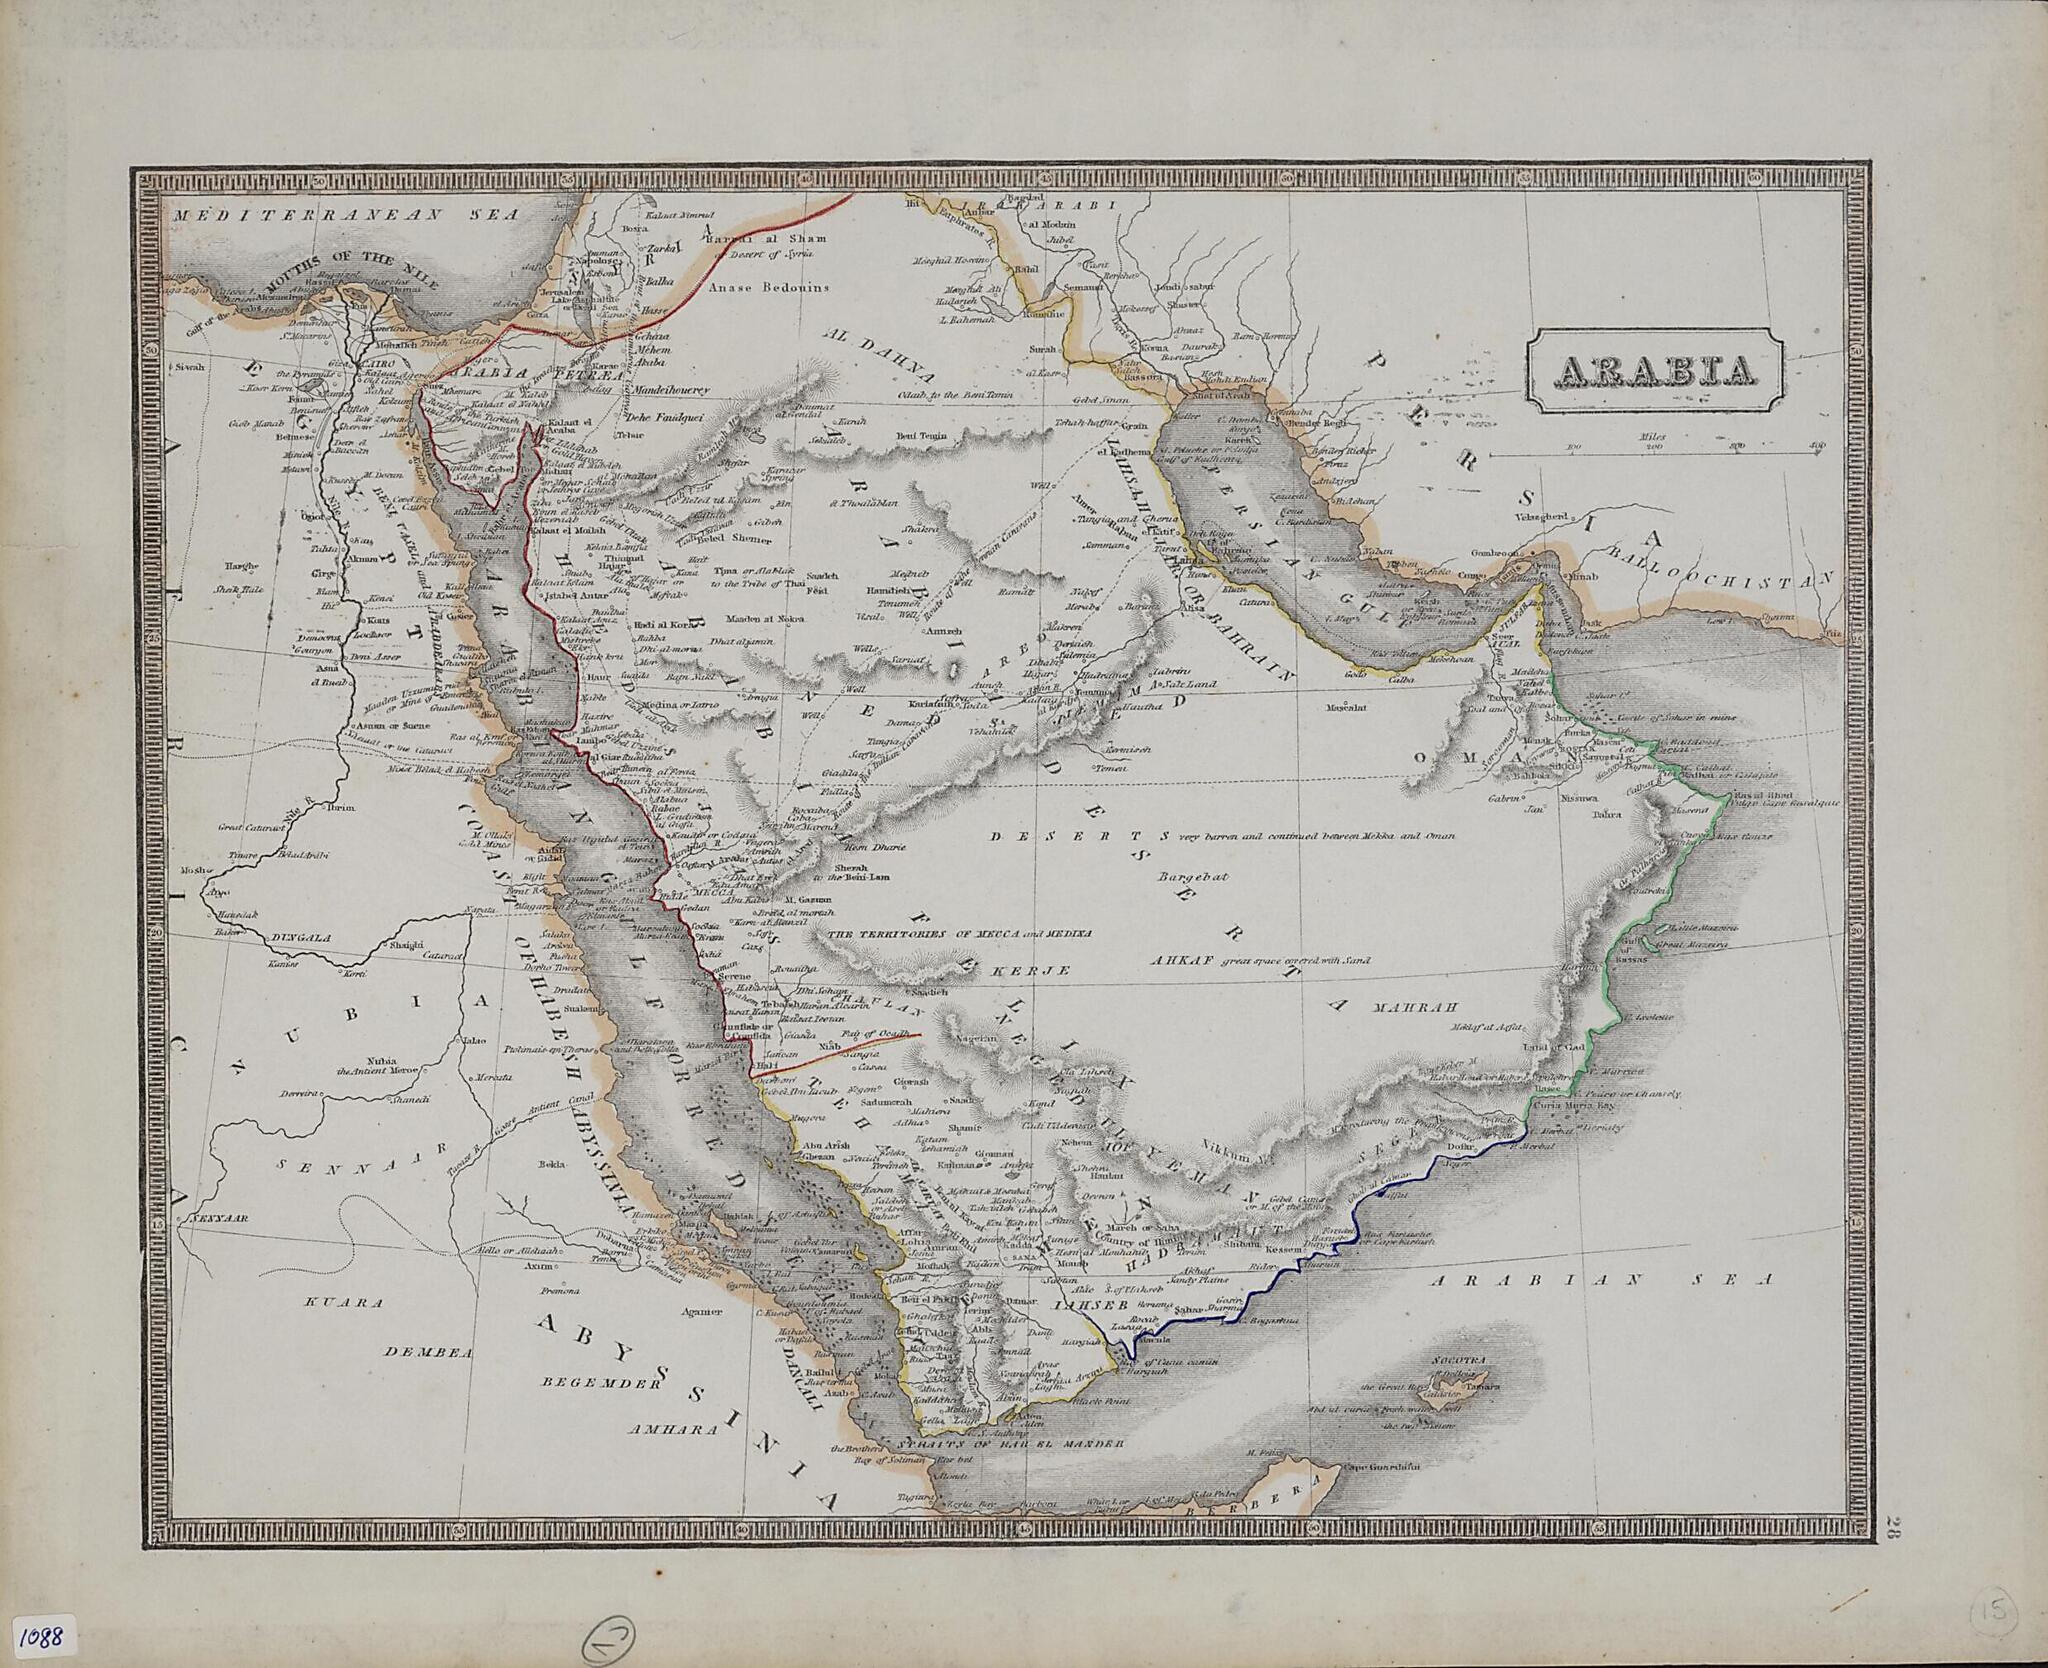 This old map of Arabia from 1860 was created by  in 1860